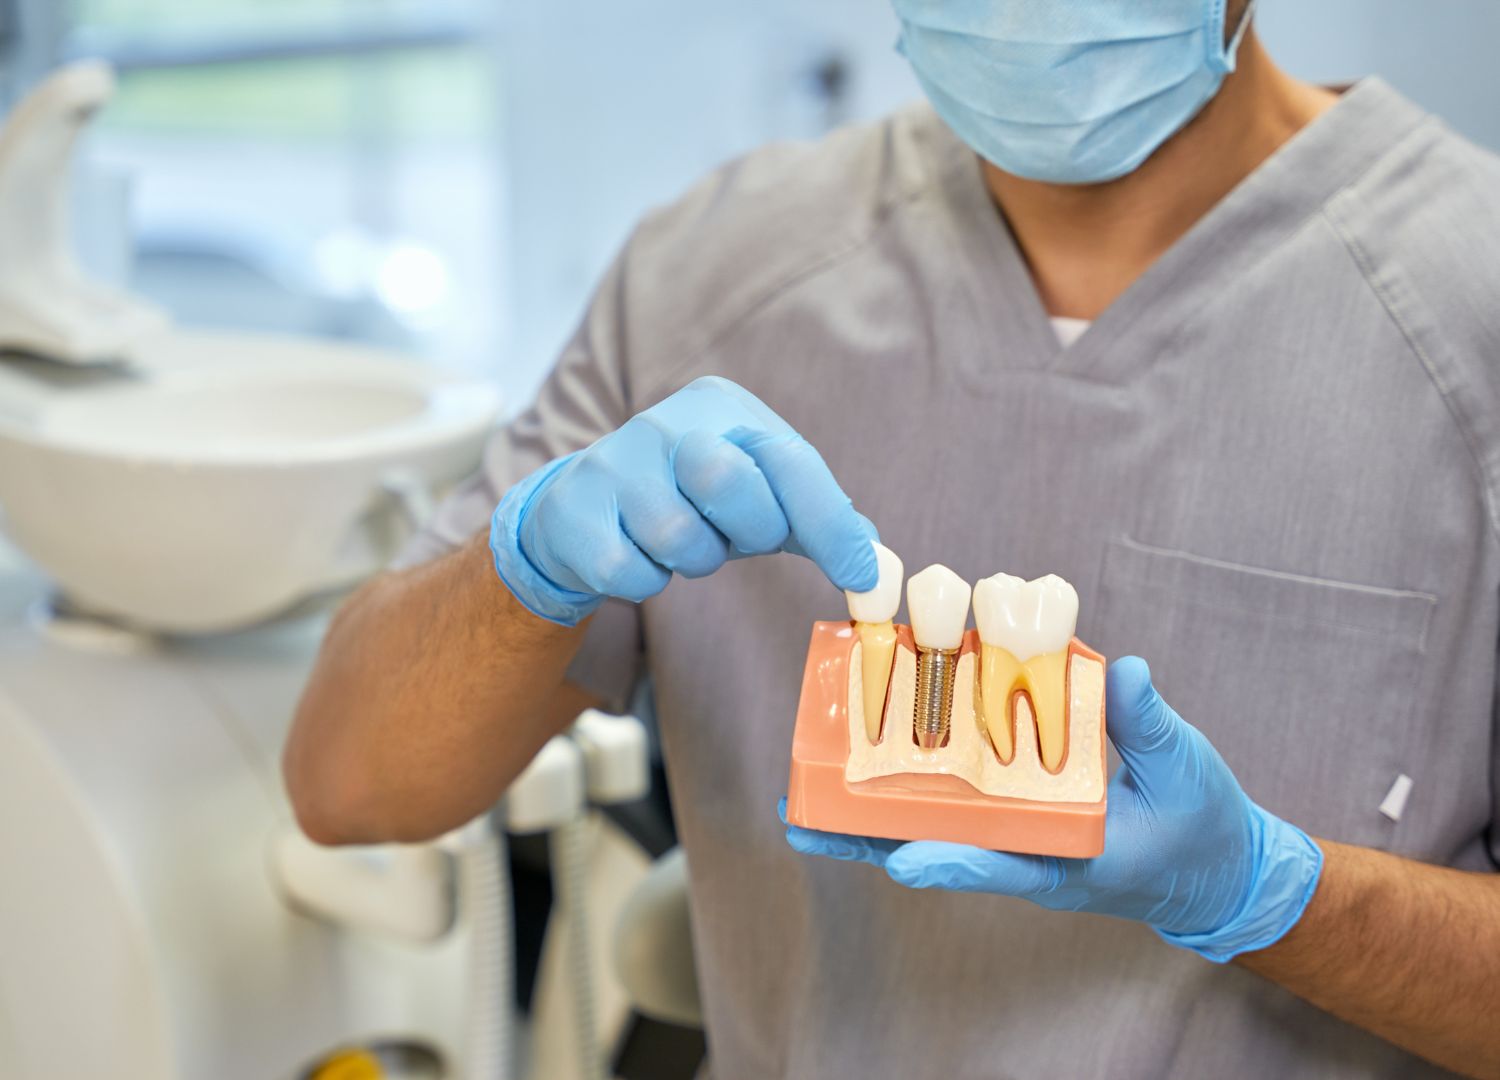 Dental Implants Or Dentures- 5 Things to consider before you choose